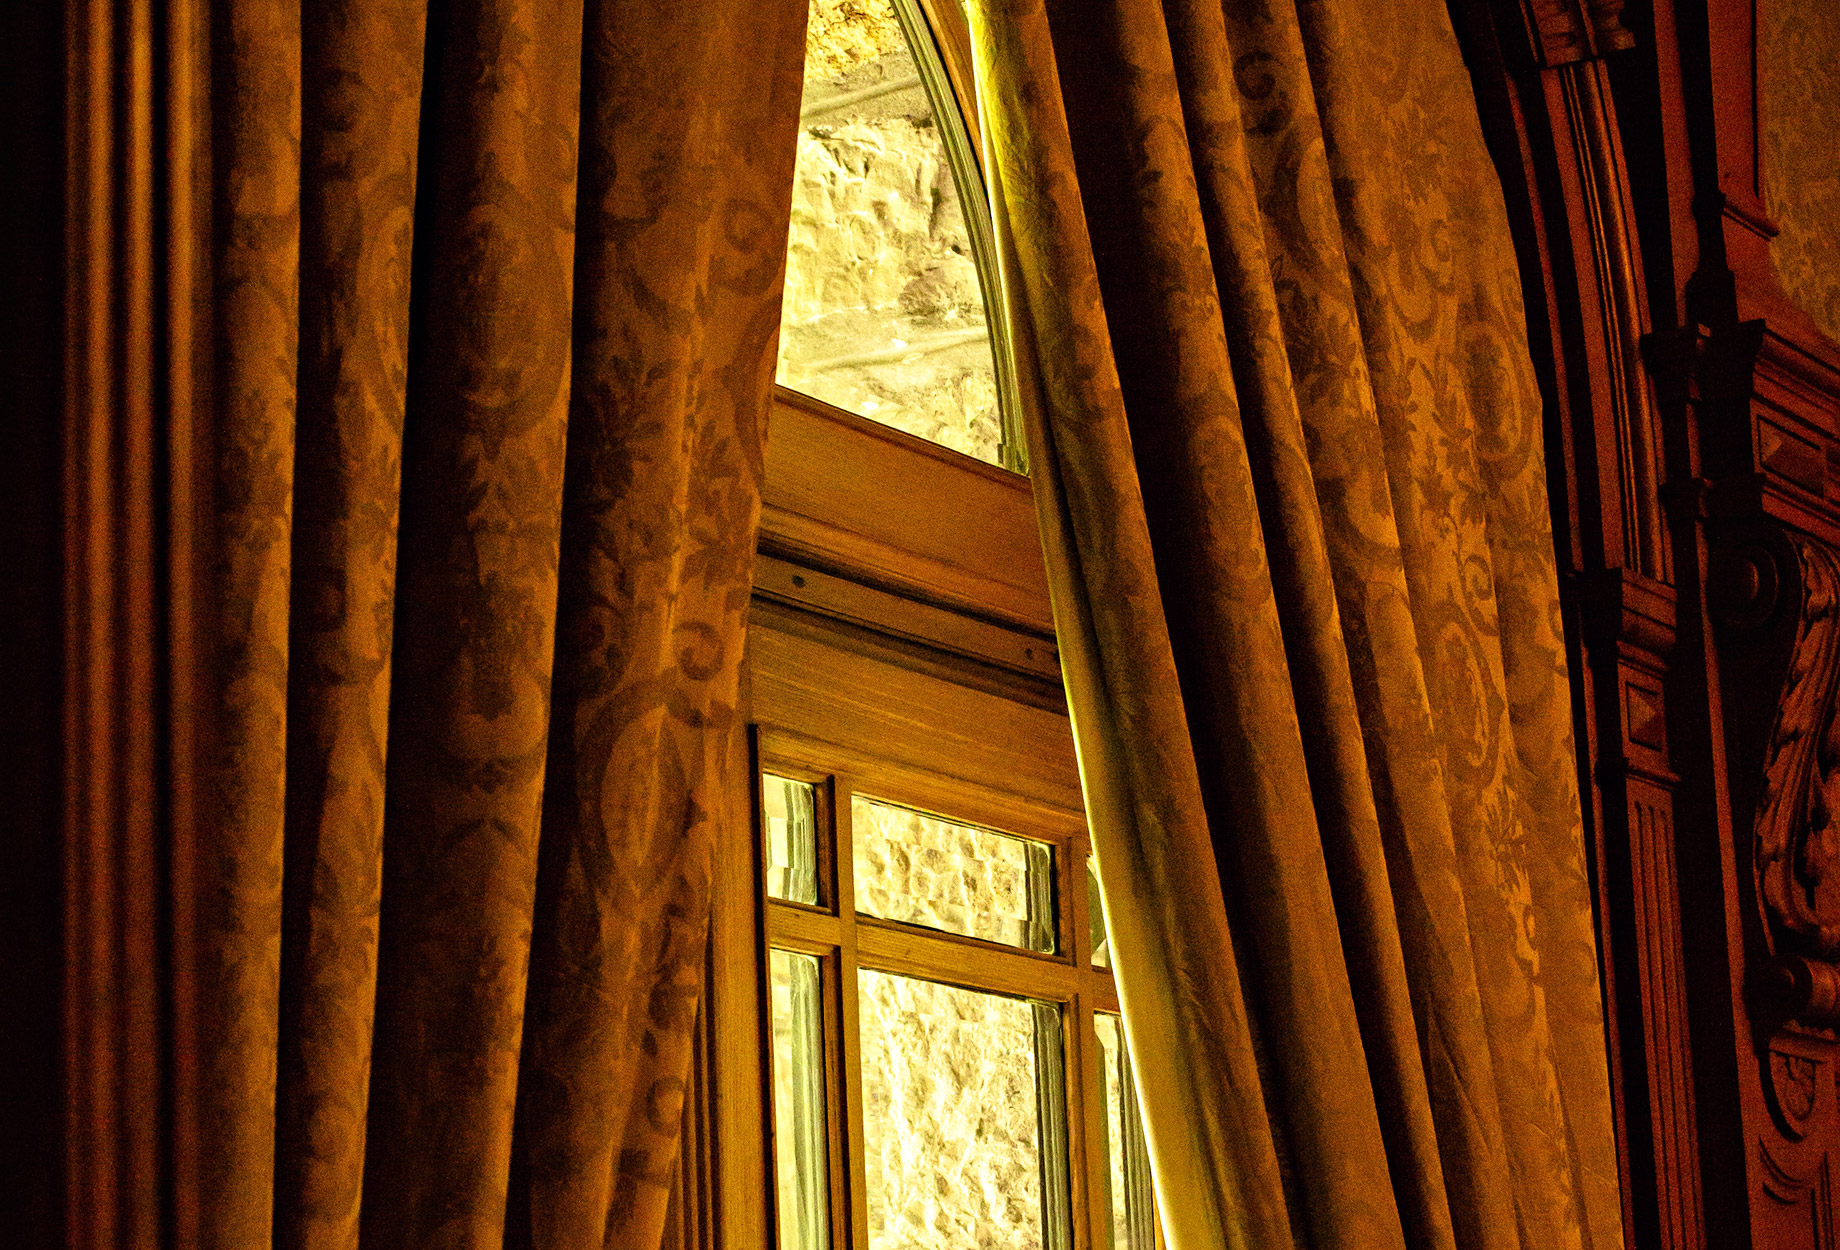 Heavy Curtains in a Castle